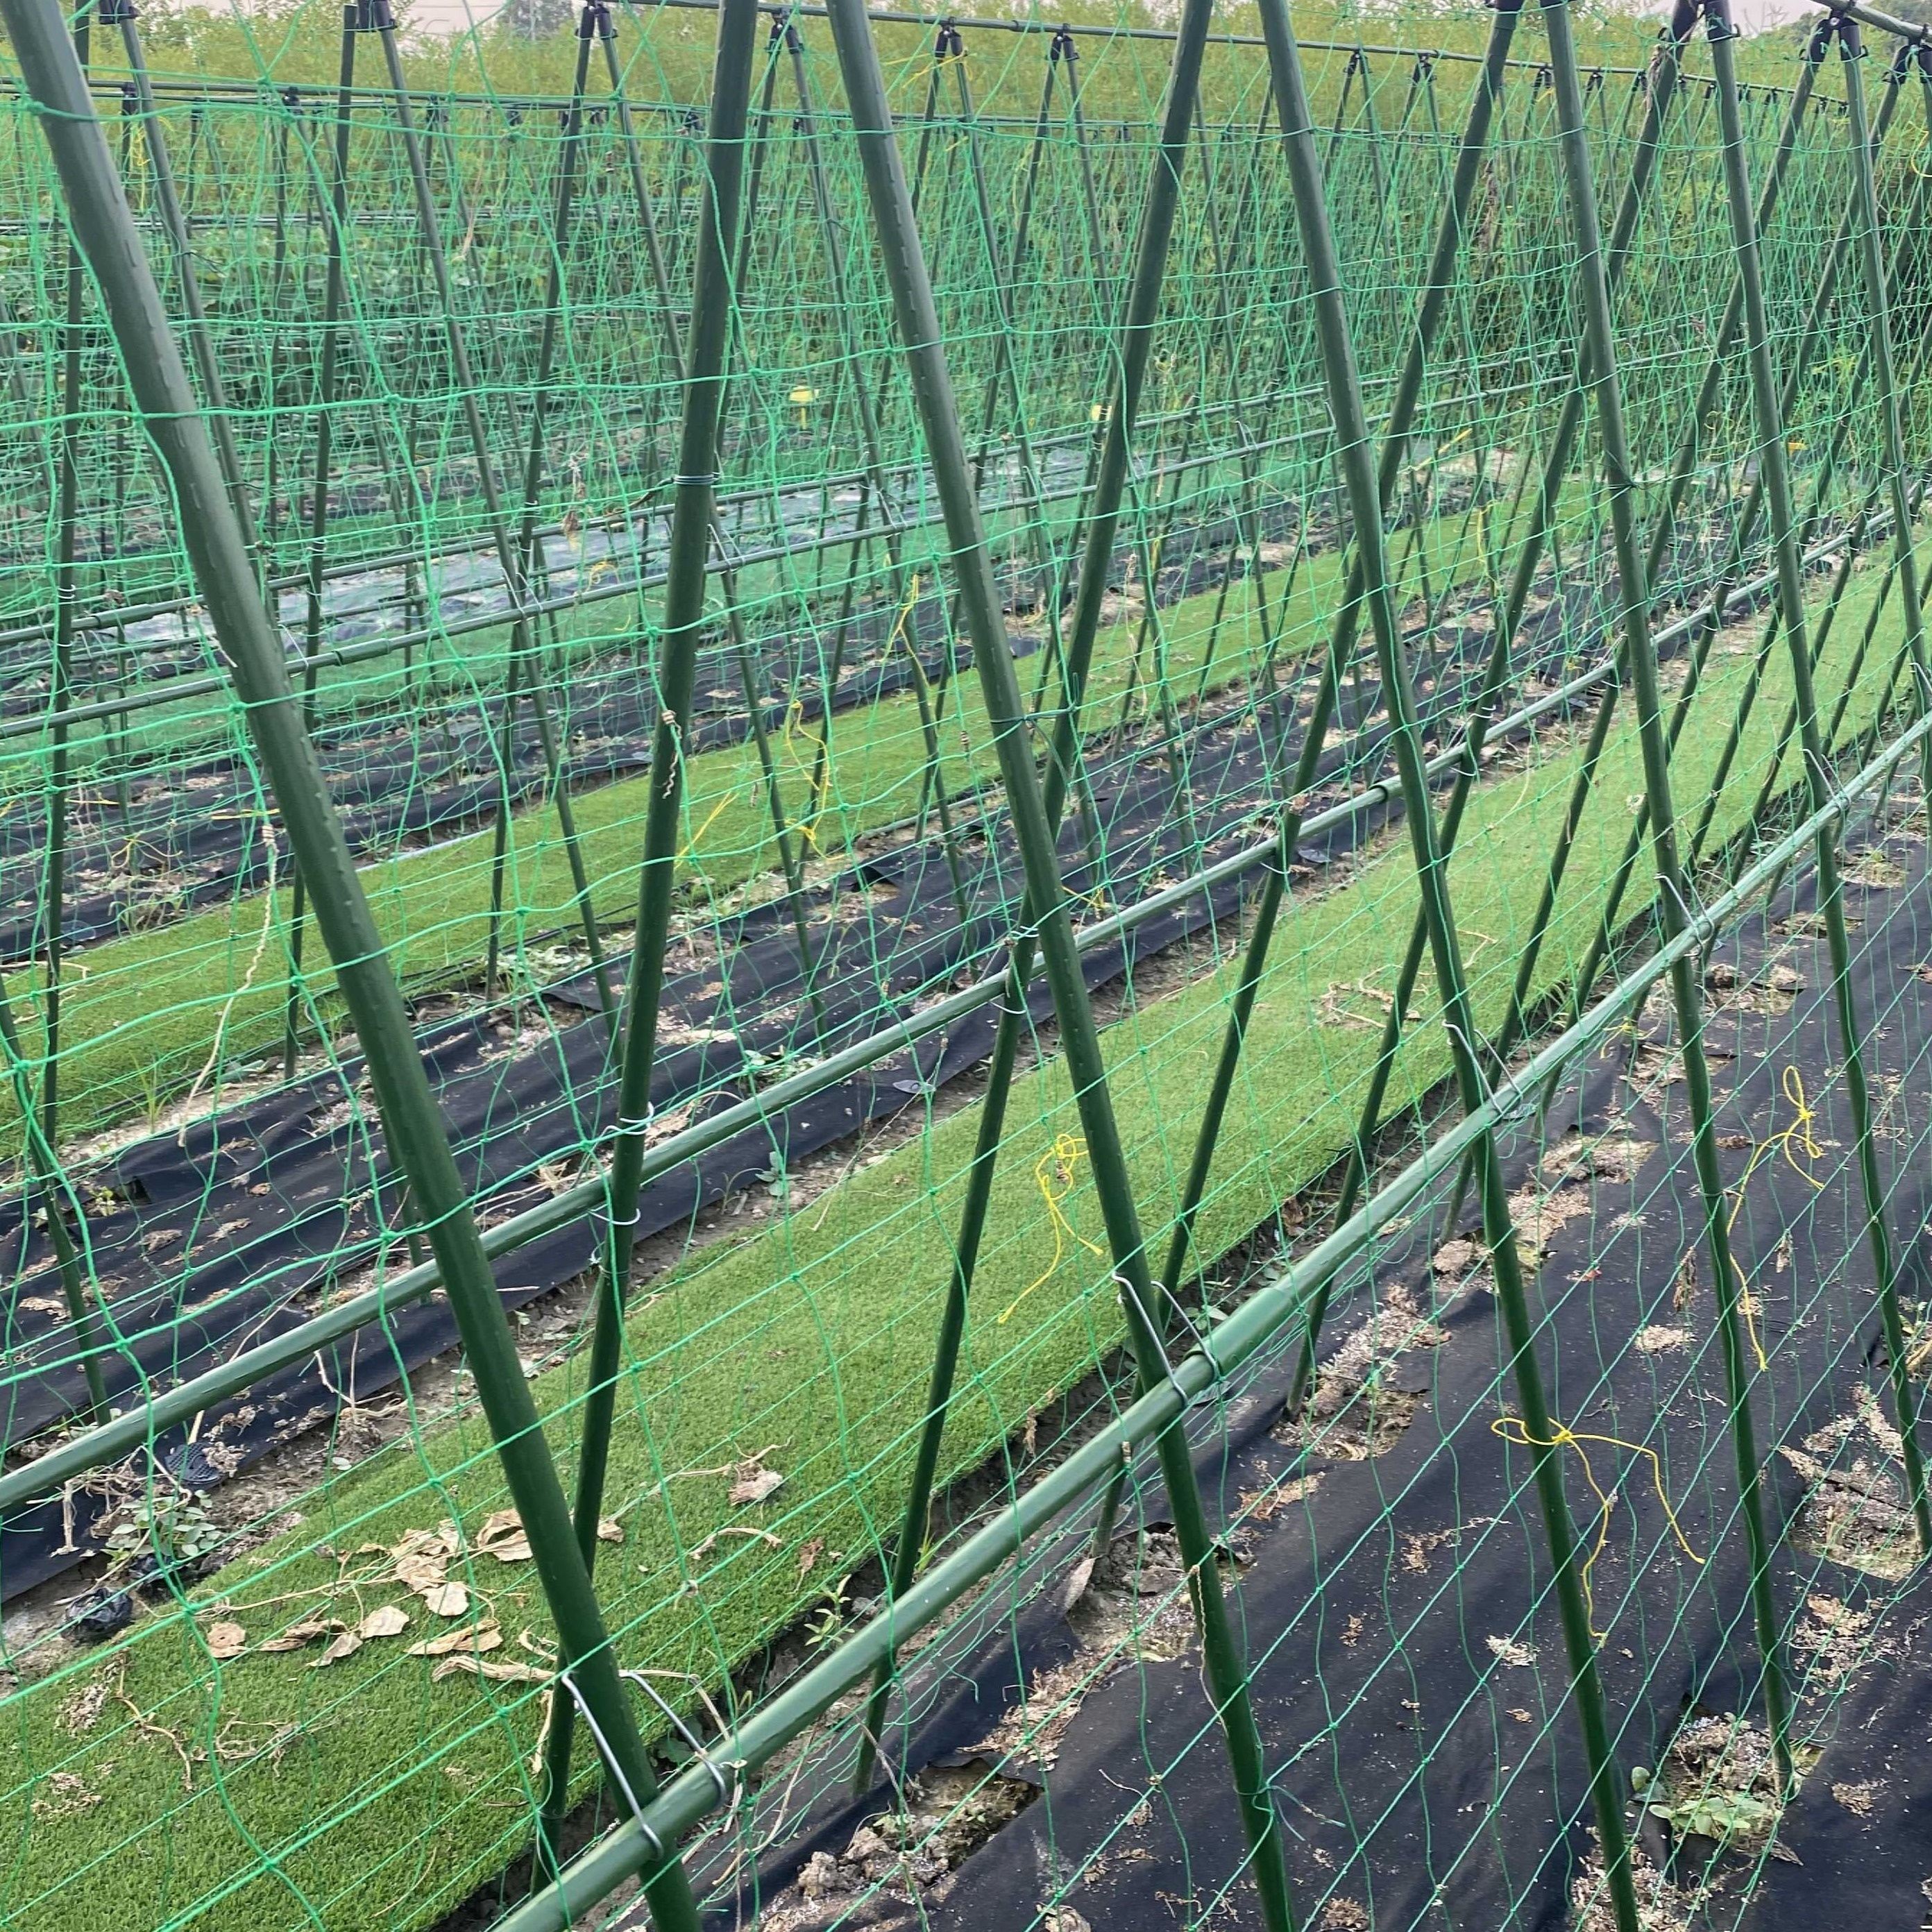 

Heavy-duty Garden Trellis Netting - Ideal For Climbing Vegetables, Clematis, Cucumbers & Tomatoes | Non-waterproof, Strong Support